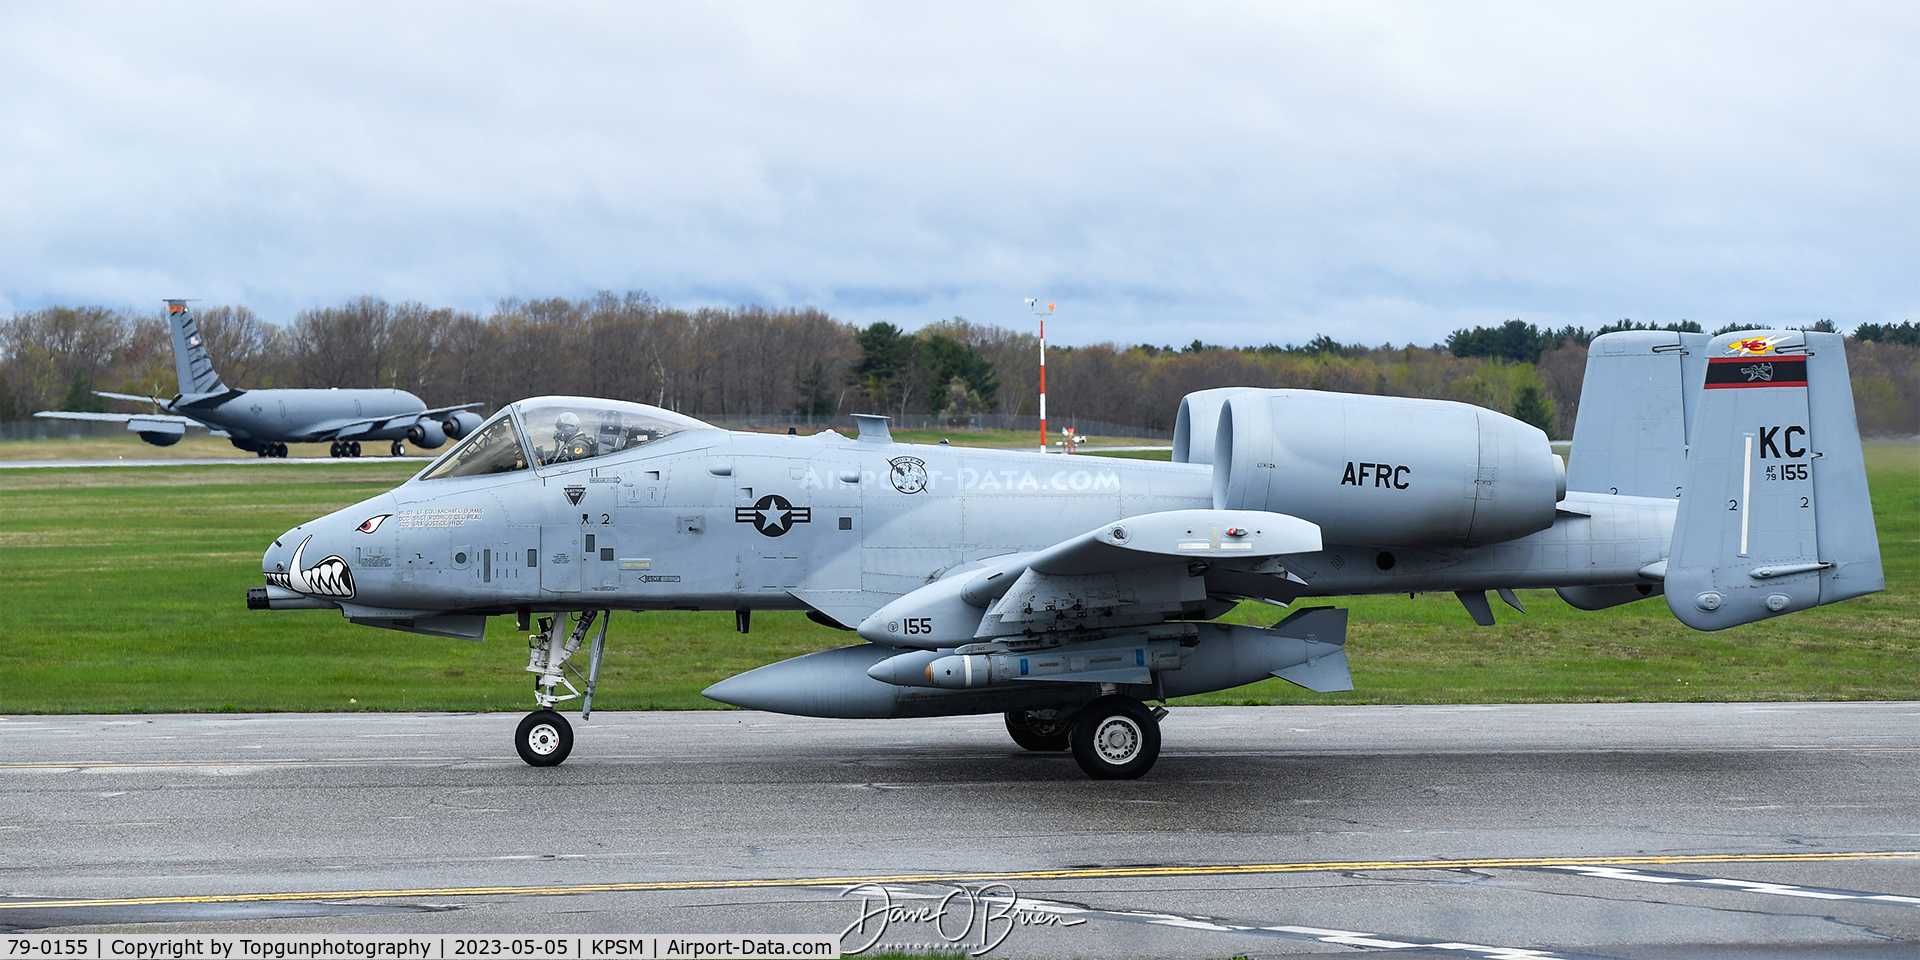 79-0155, 1979 Fairchild Republic A-10C Thunderbolt II C/N A10-0419, TREND14 taxiing as ROMA62 takes off